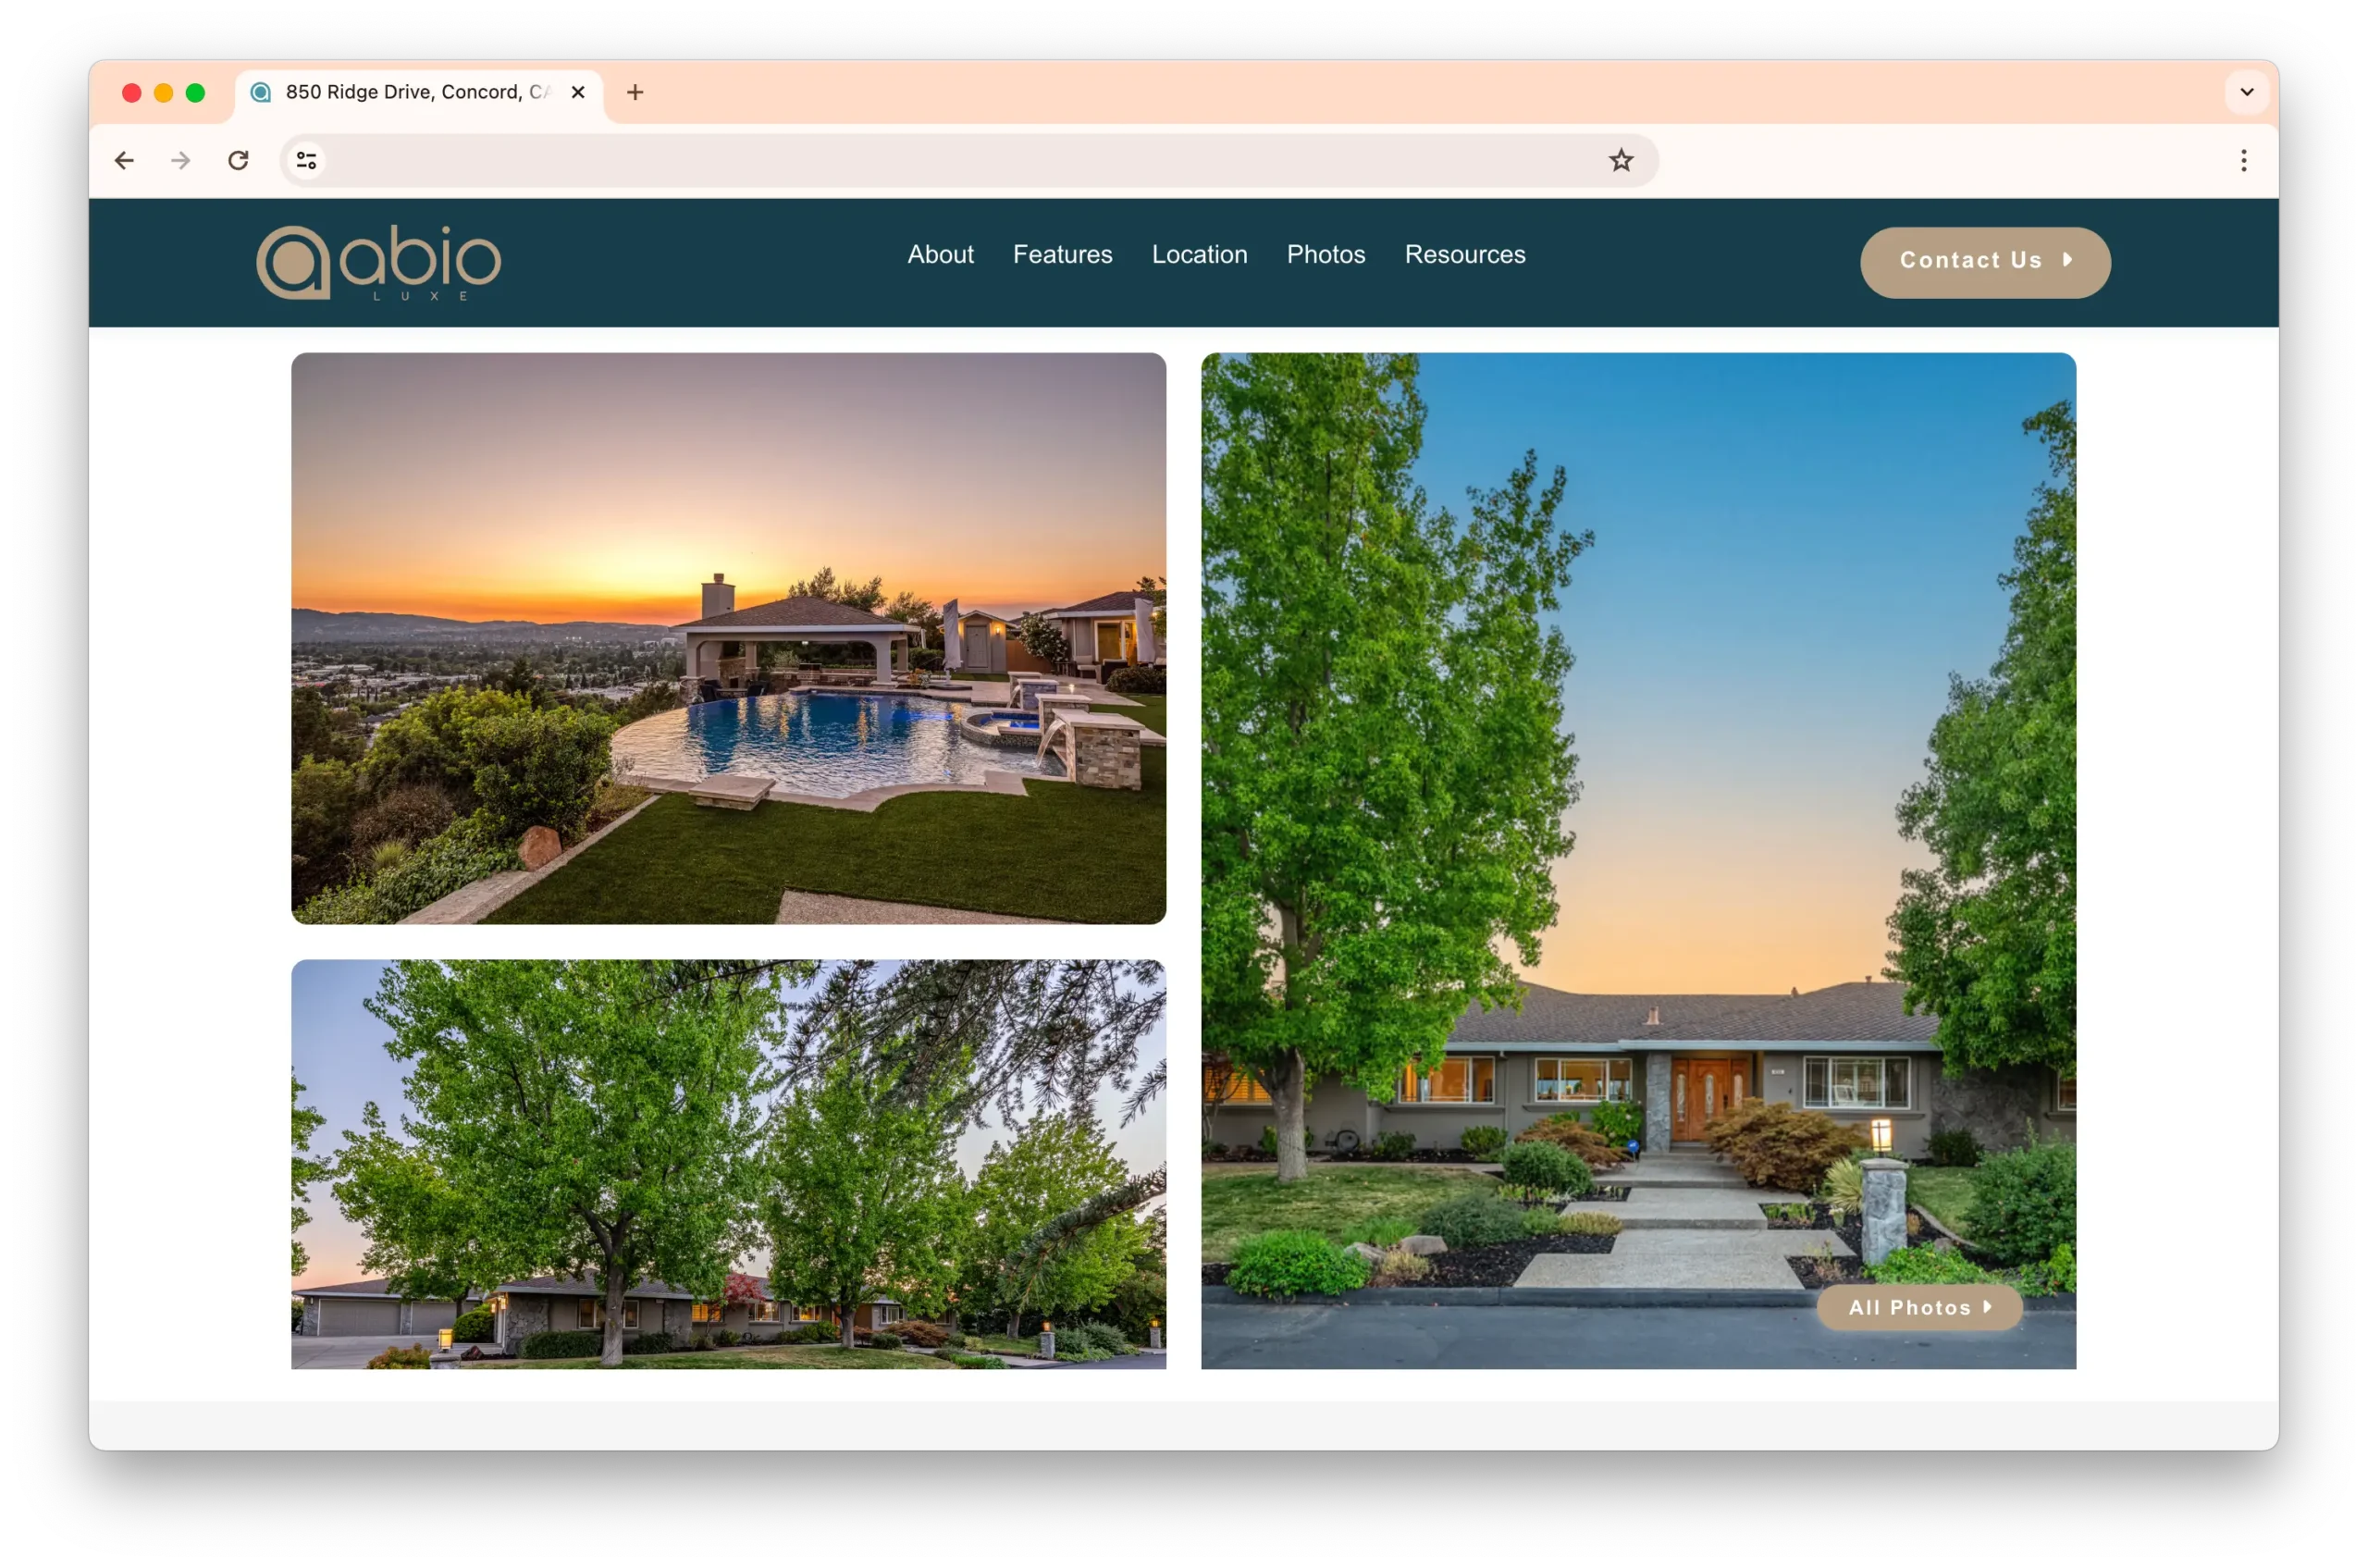 A property listing for 850 Ridge Drive, Concord, CA 94518, on Abio Luxe. The image shows a luxurious backyard with a pool and a view of the sunset over the city.